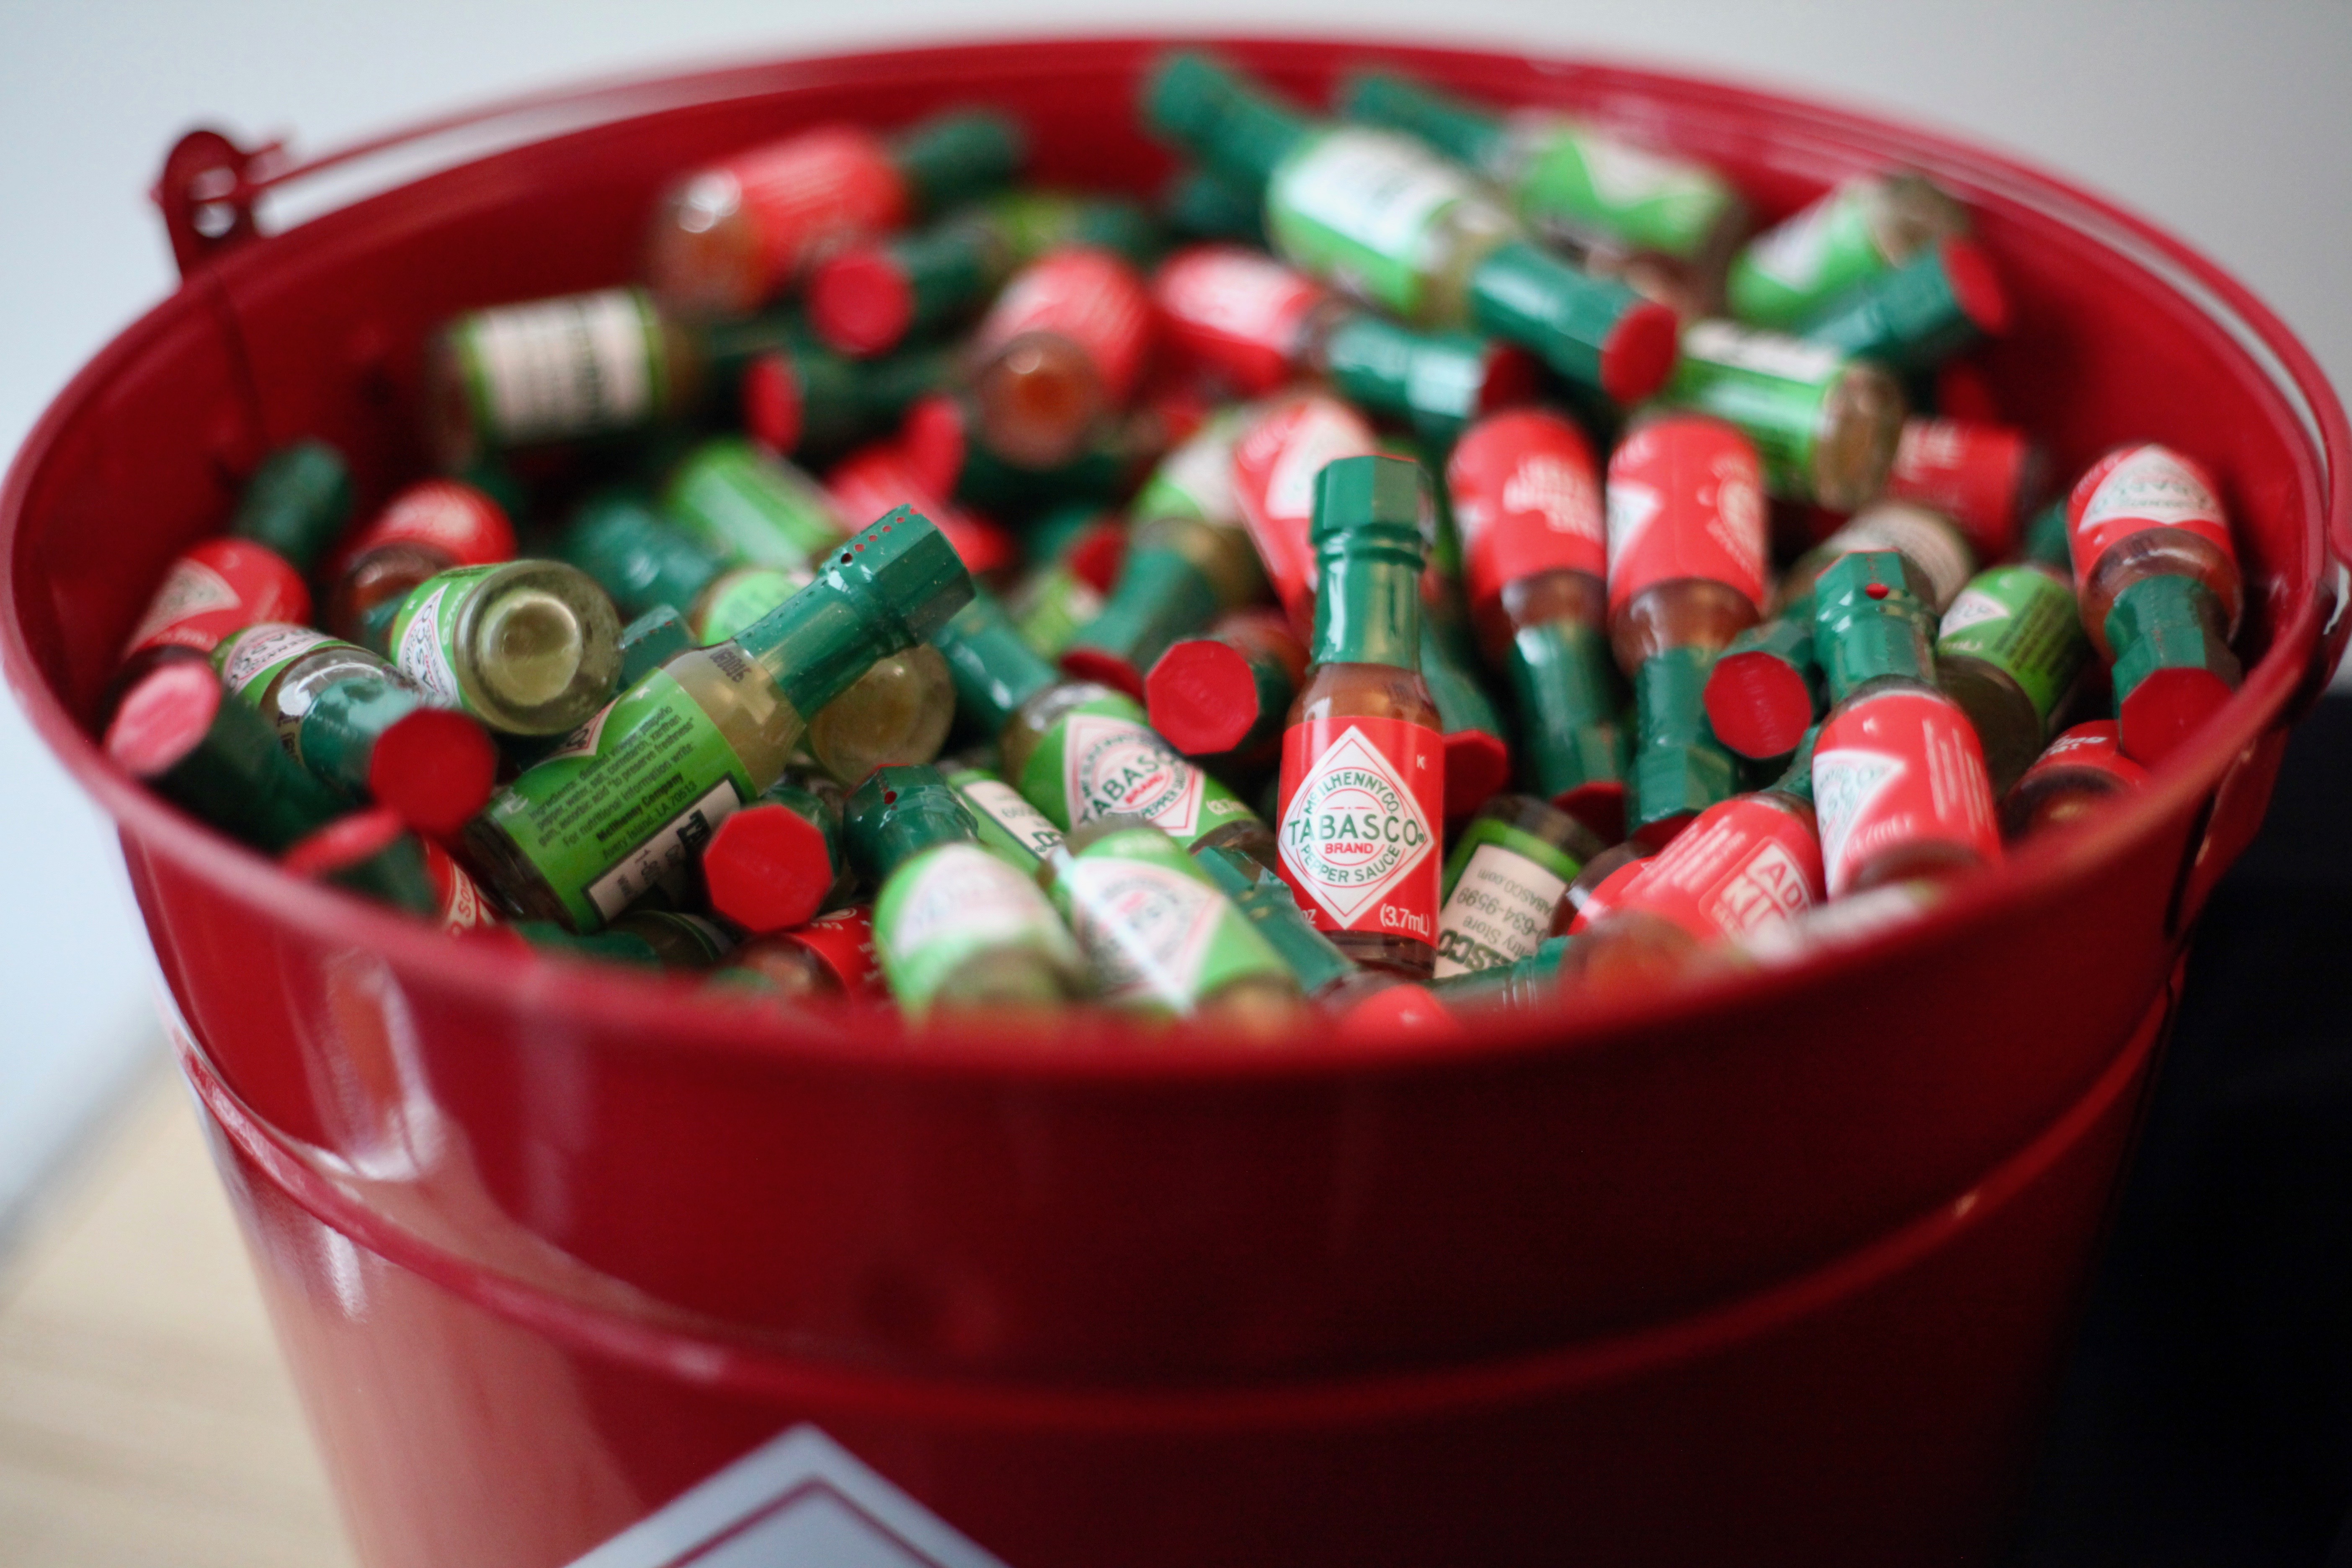 A bucket filled with tiny bottles of Tabasco